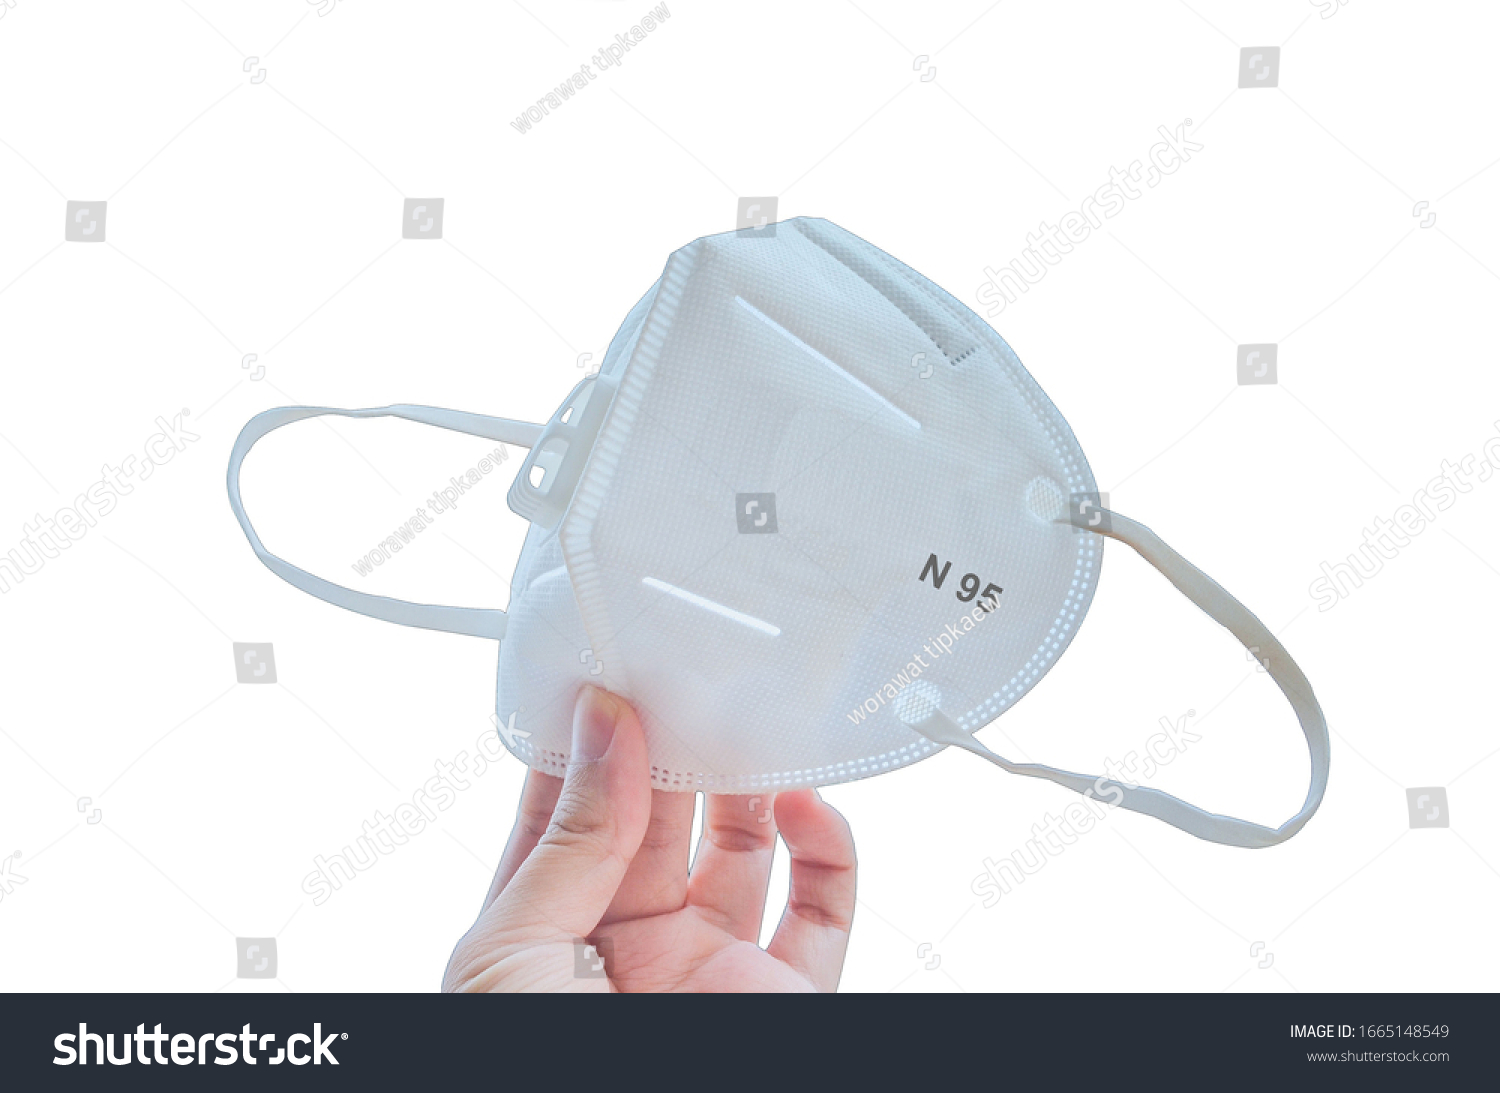 KN95 or N95 mask for protection pm 2.5 and corona virus (COVIT-19).Anti pollution mask.air face mask.KN95 or N95 mask with N95 word.n95 on white background with clipping path. #1665148549